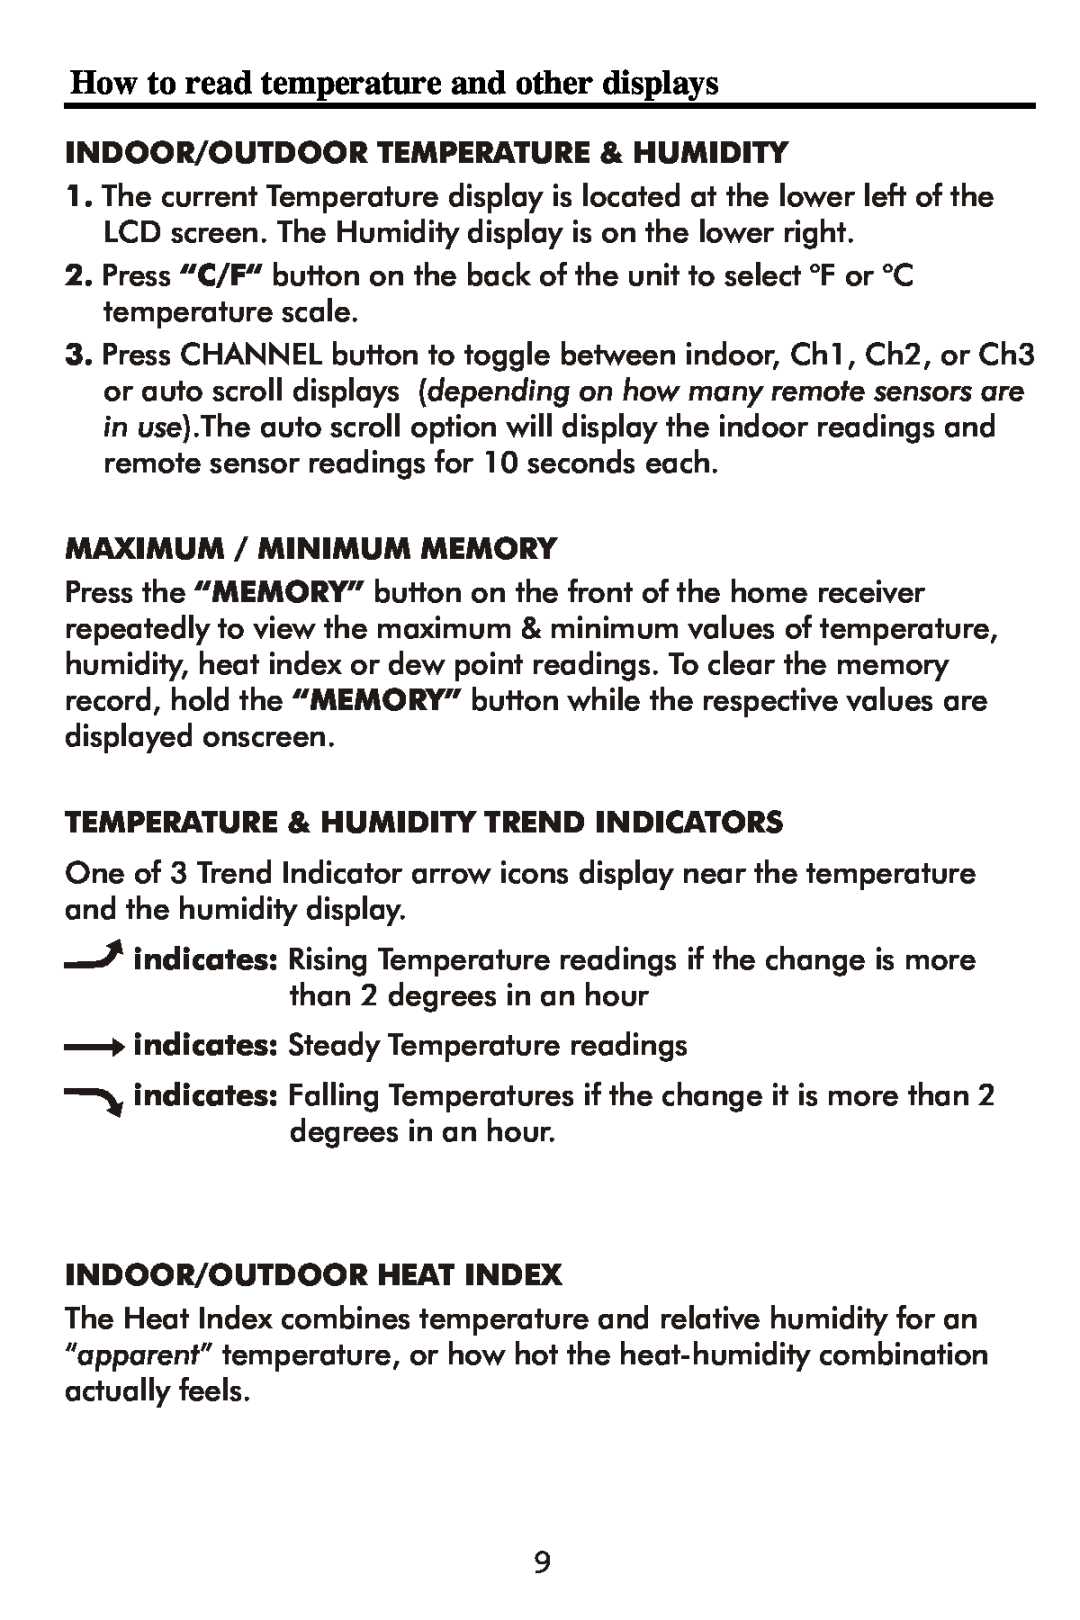 Taylor 1506 How to read temperature and other displays, Indoor/Outdoor Temperature & Humidity, Maximum / Minimum Memory 